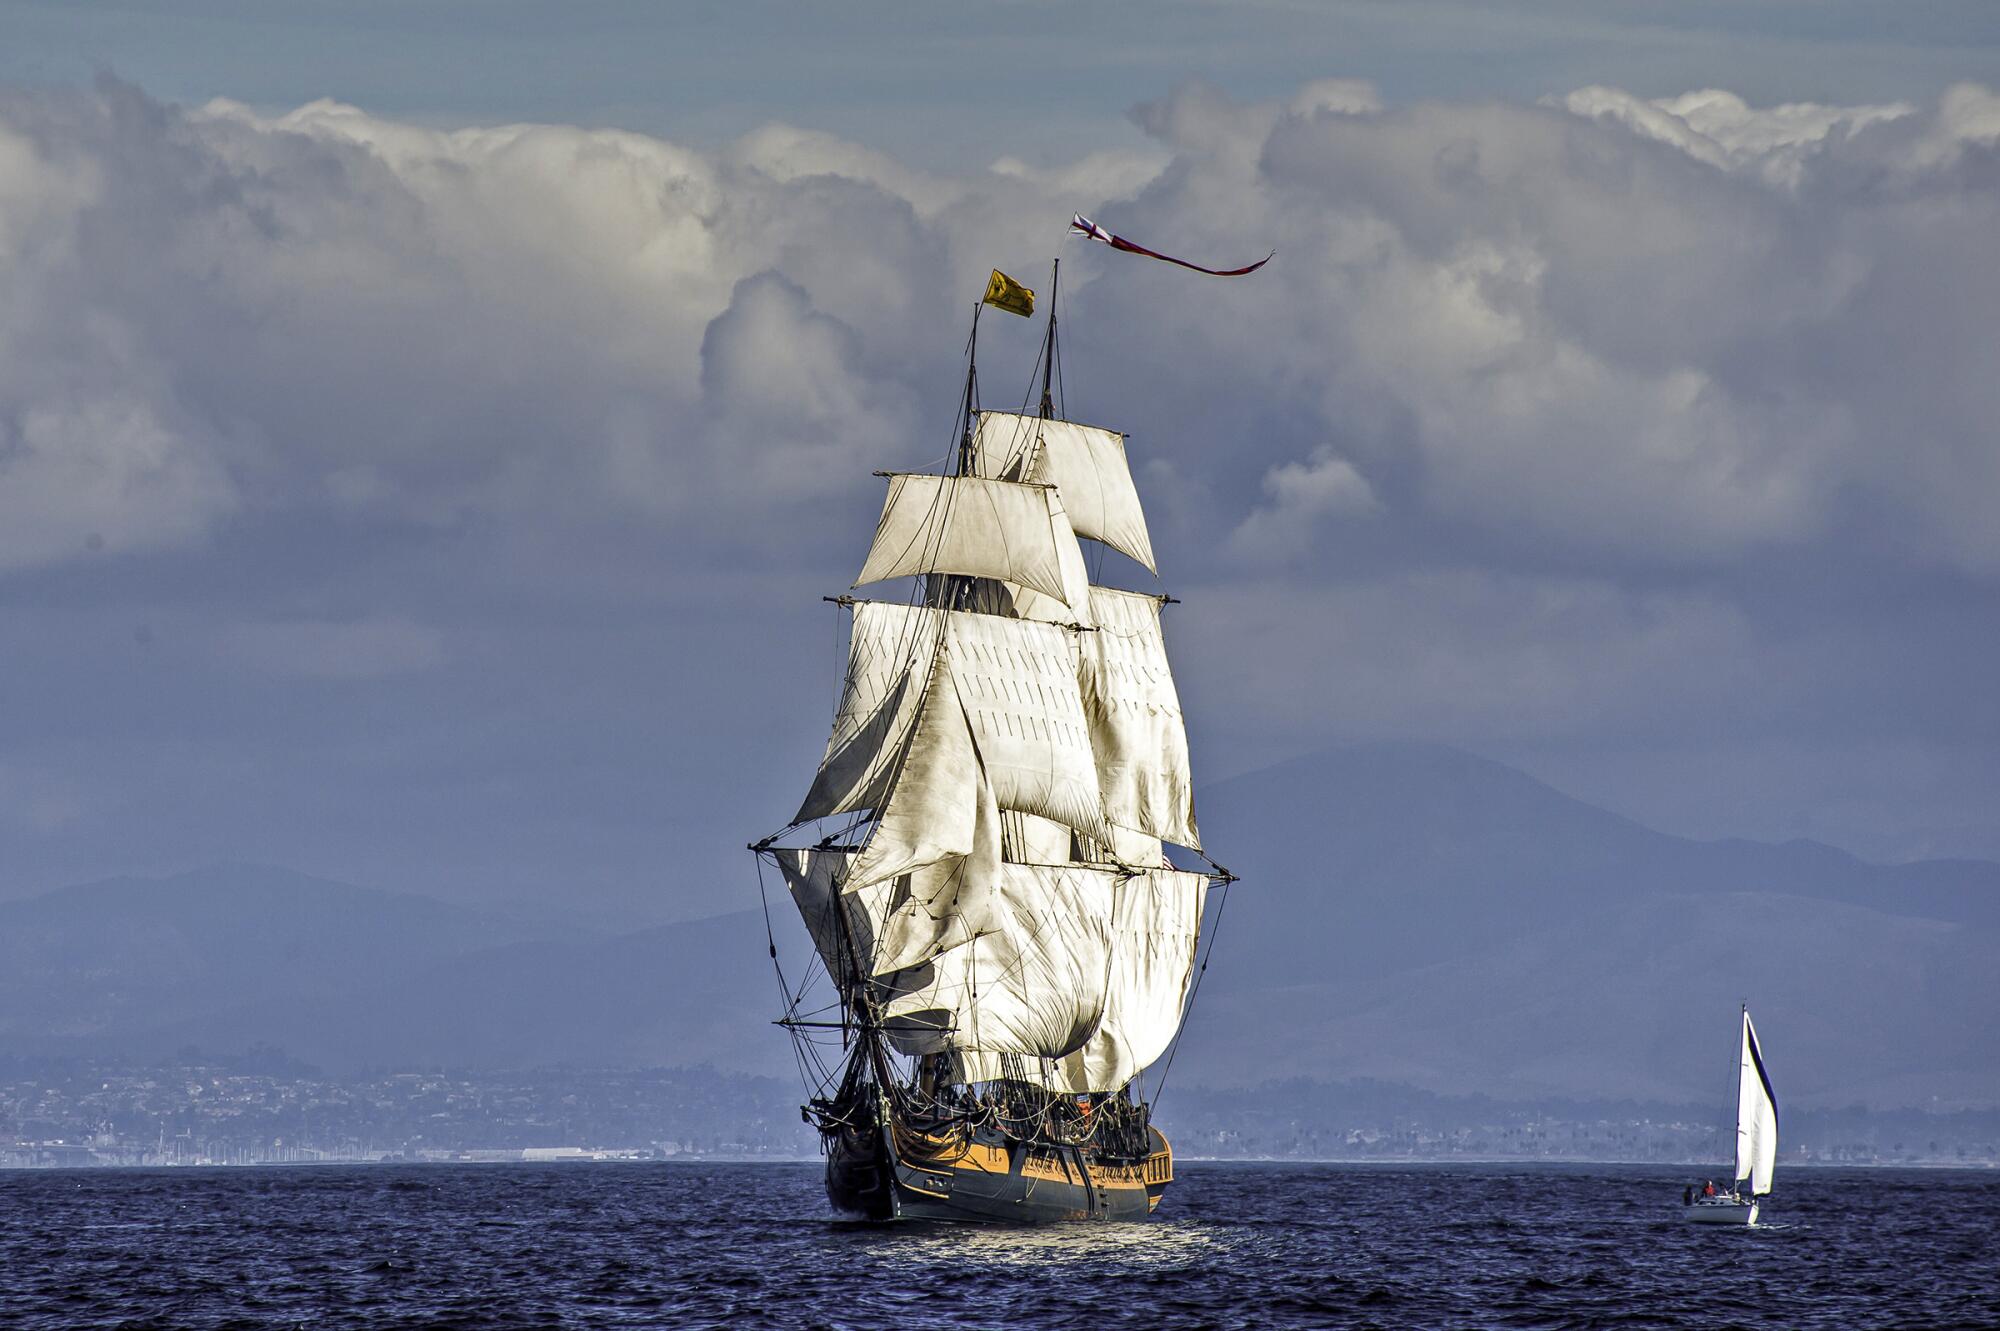 A wide view of the tall ship under sail.